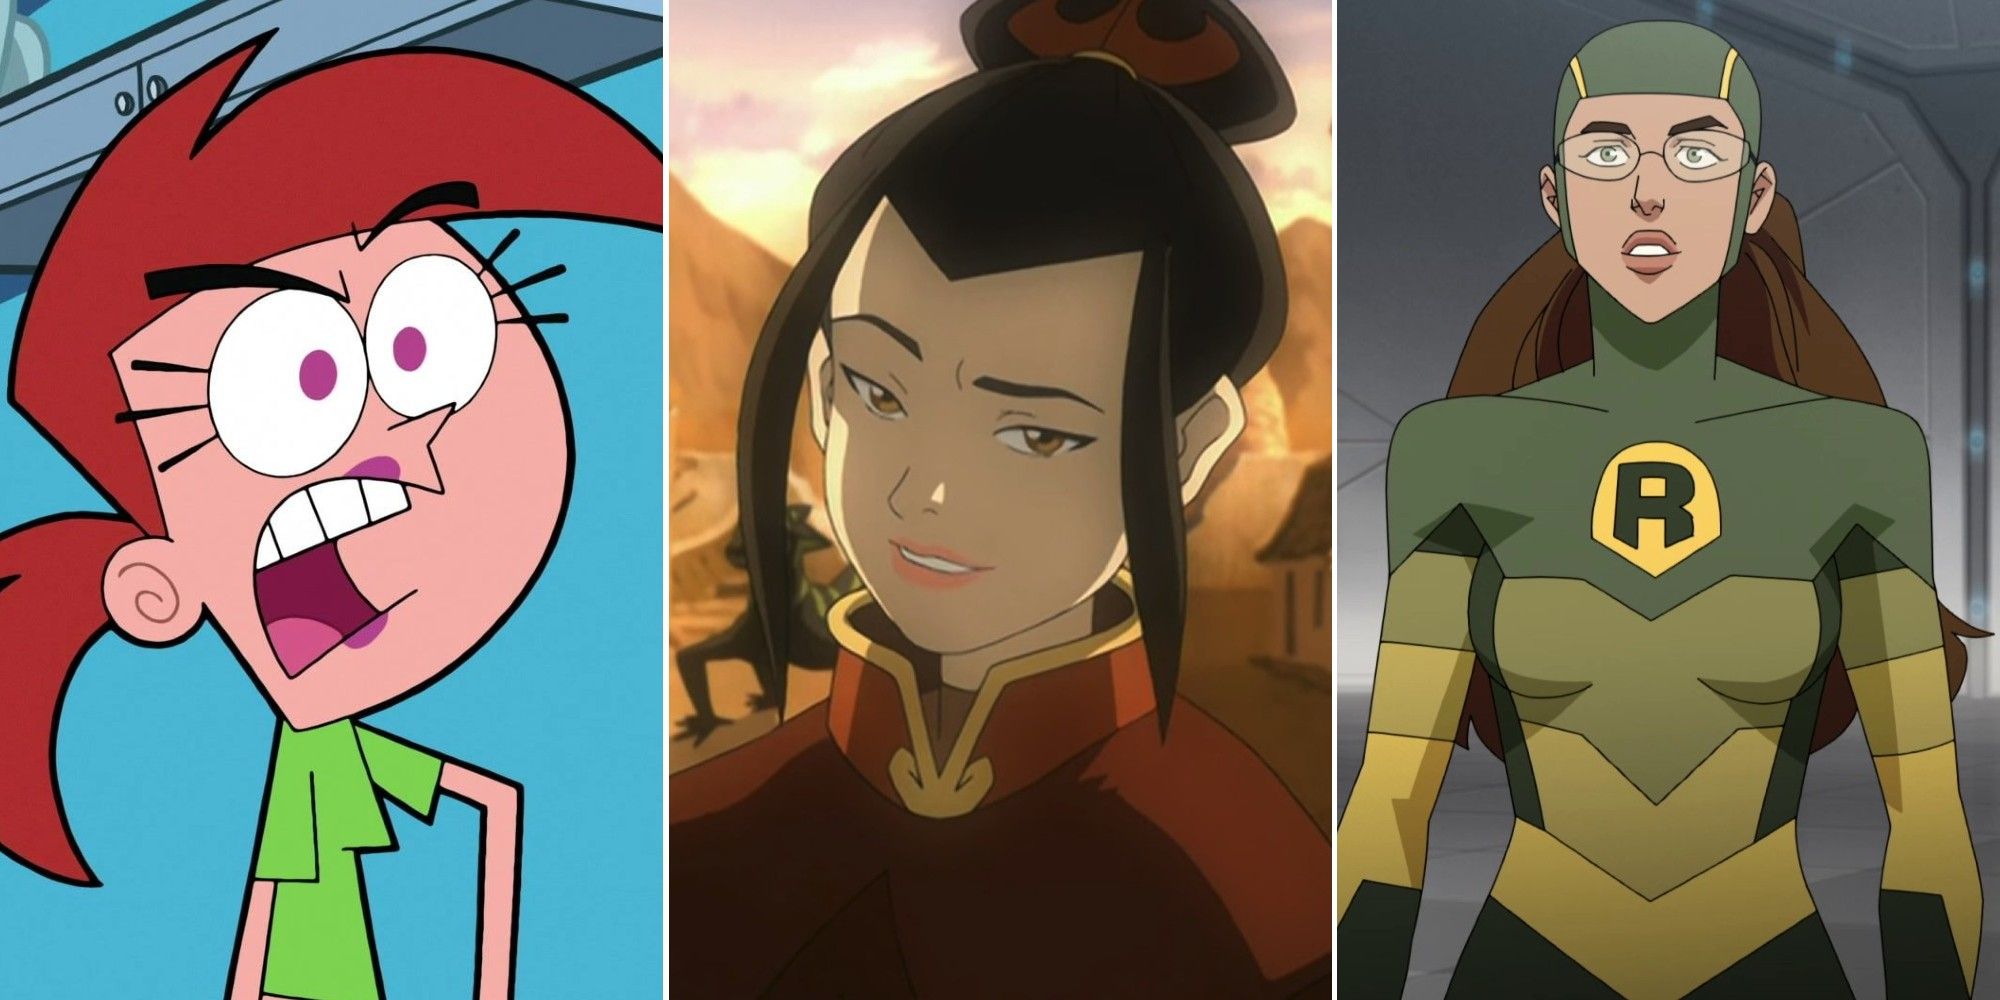 Vicky in The Fairly OddParents; Princess Azula in Avatar The Last Airbender; Shrinking Rae in Invincible